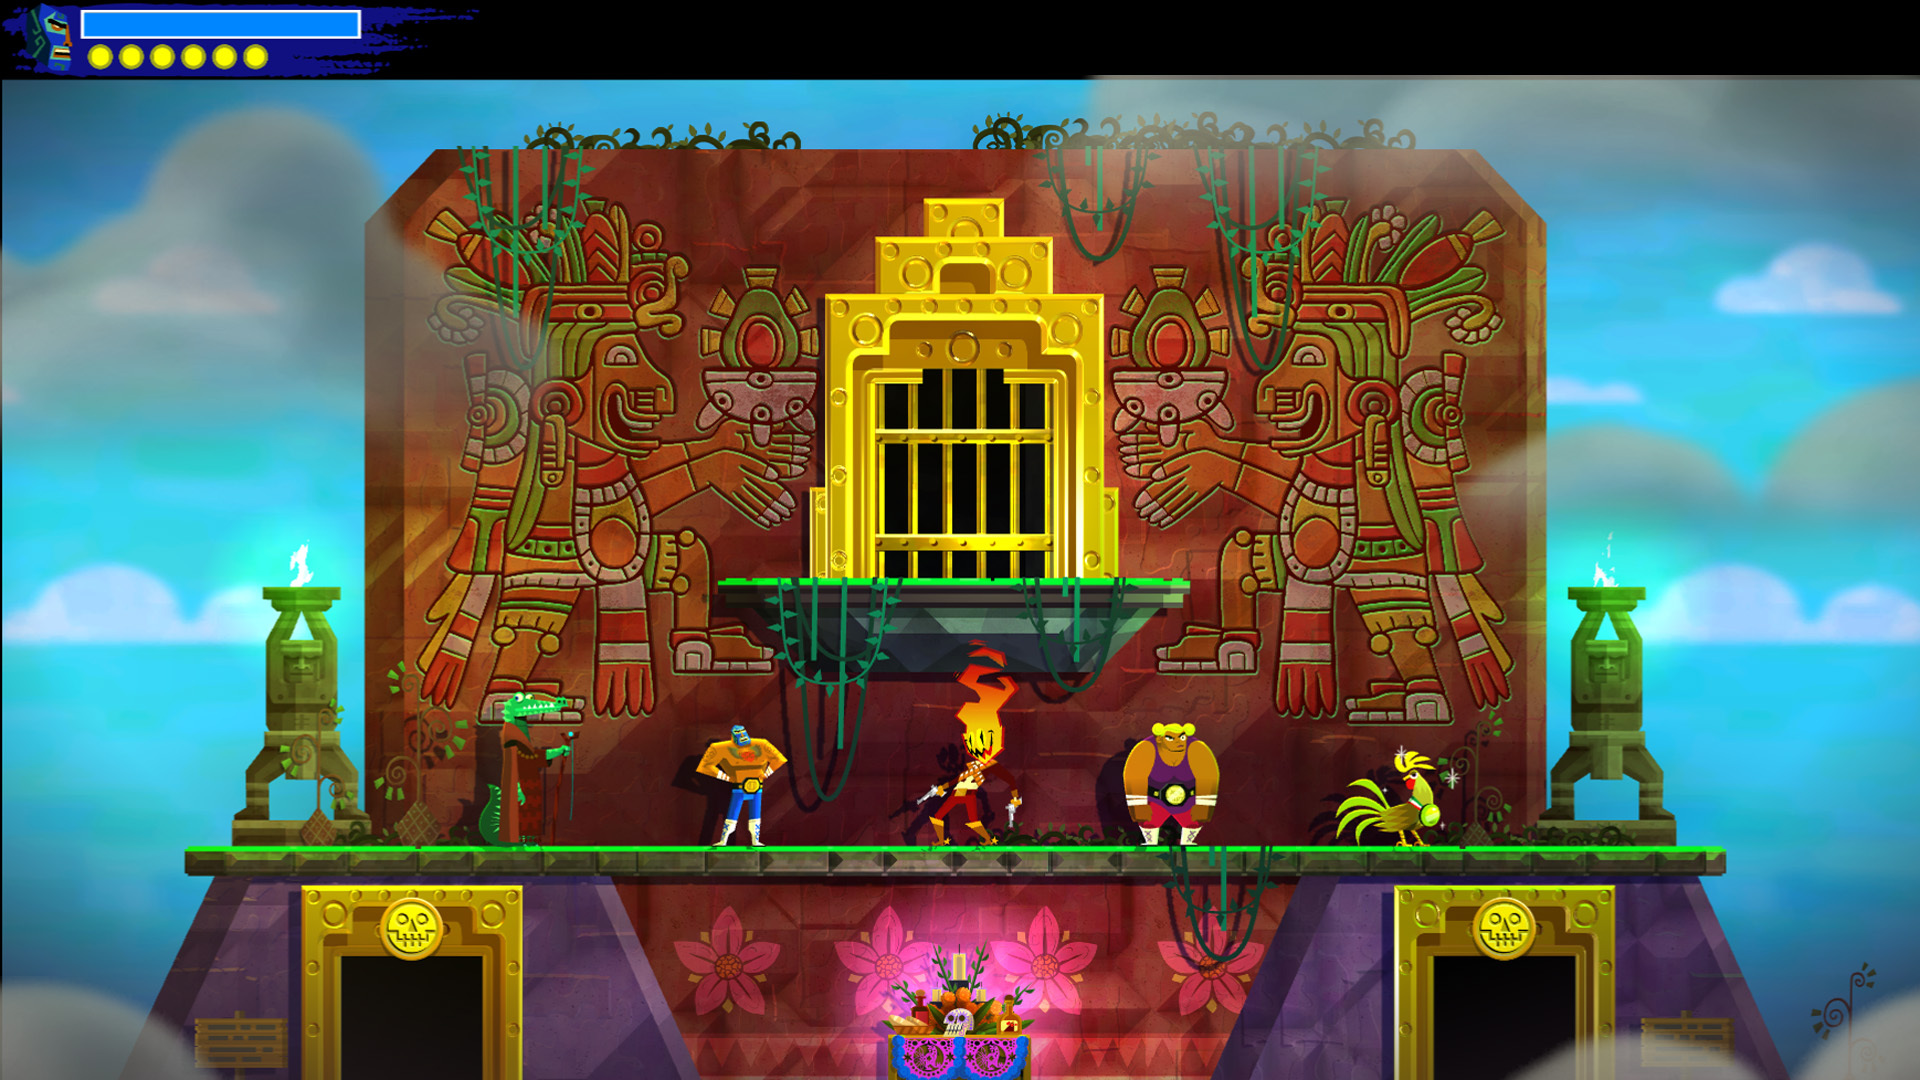 Guacamelee! 2 - The Proving Grounds (Challenge Level) - GOG Database